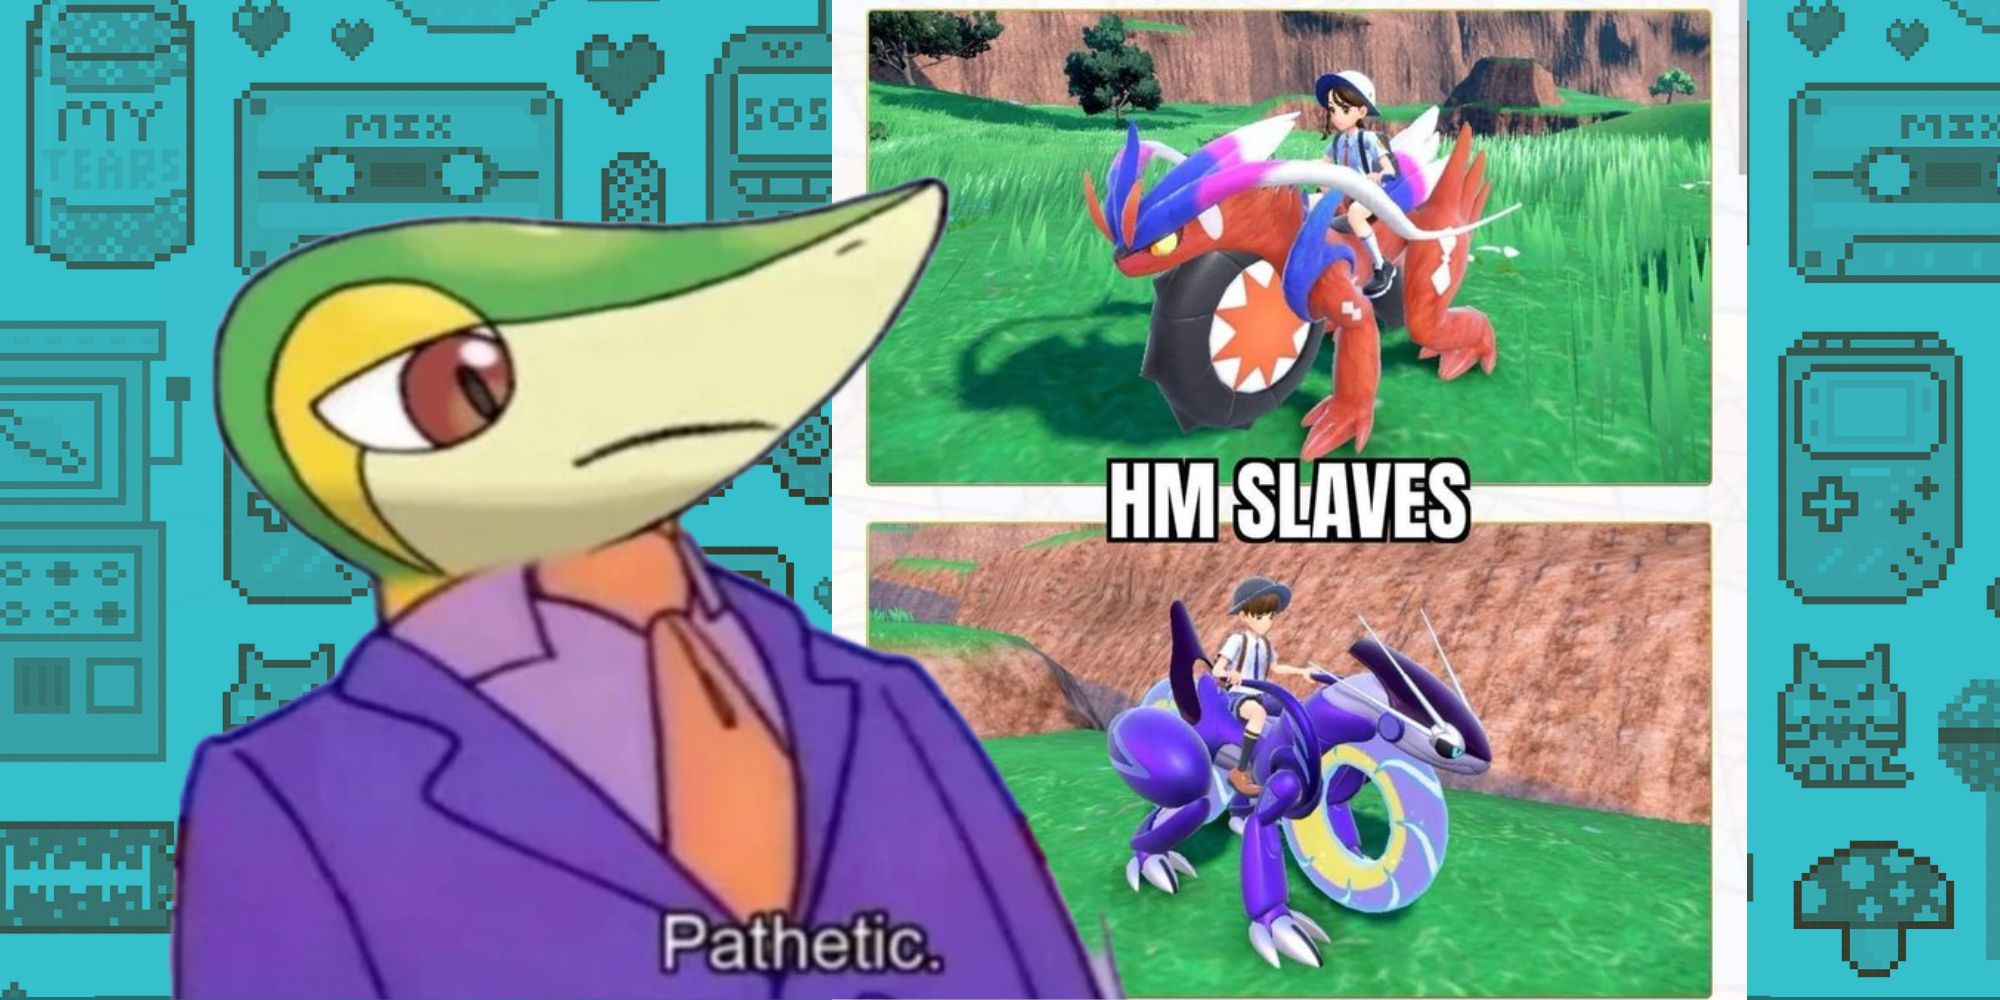 The Pokémon Snivy wears a purple suit and gazes downward, with the text, 